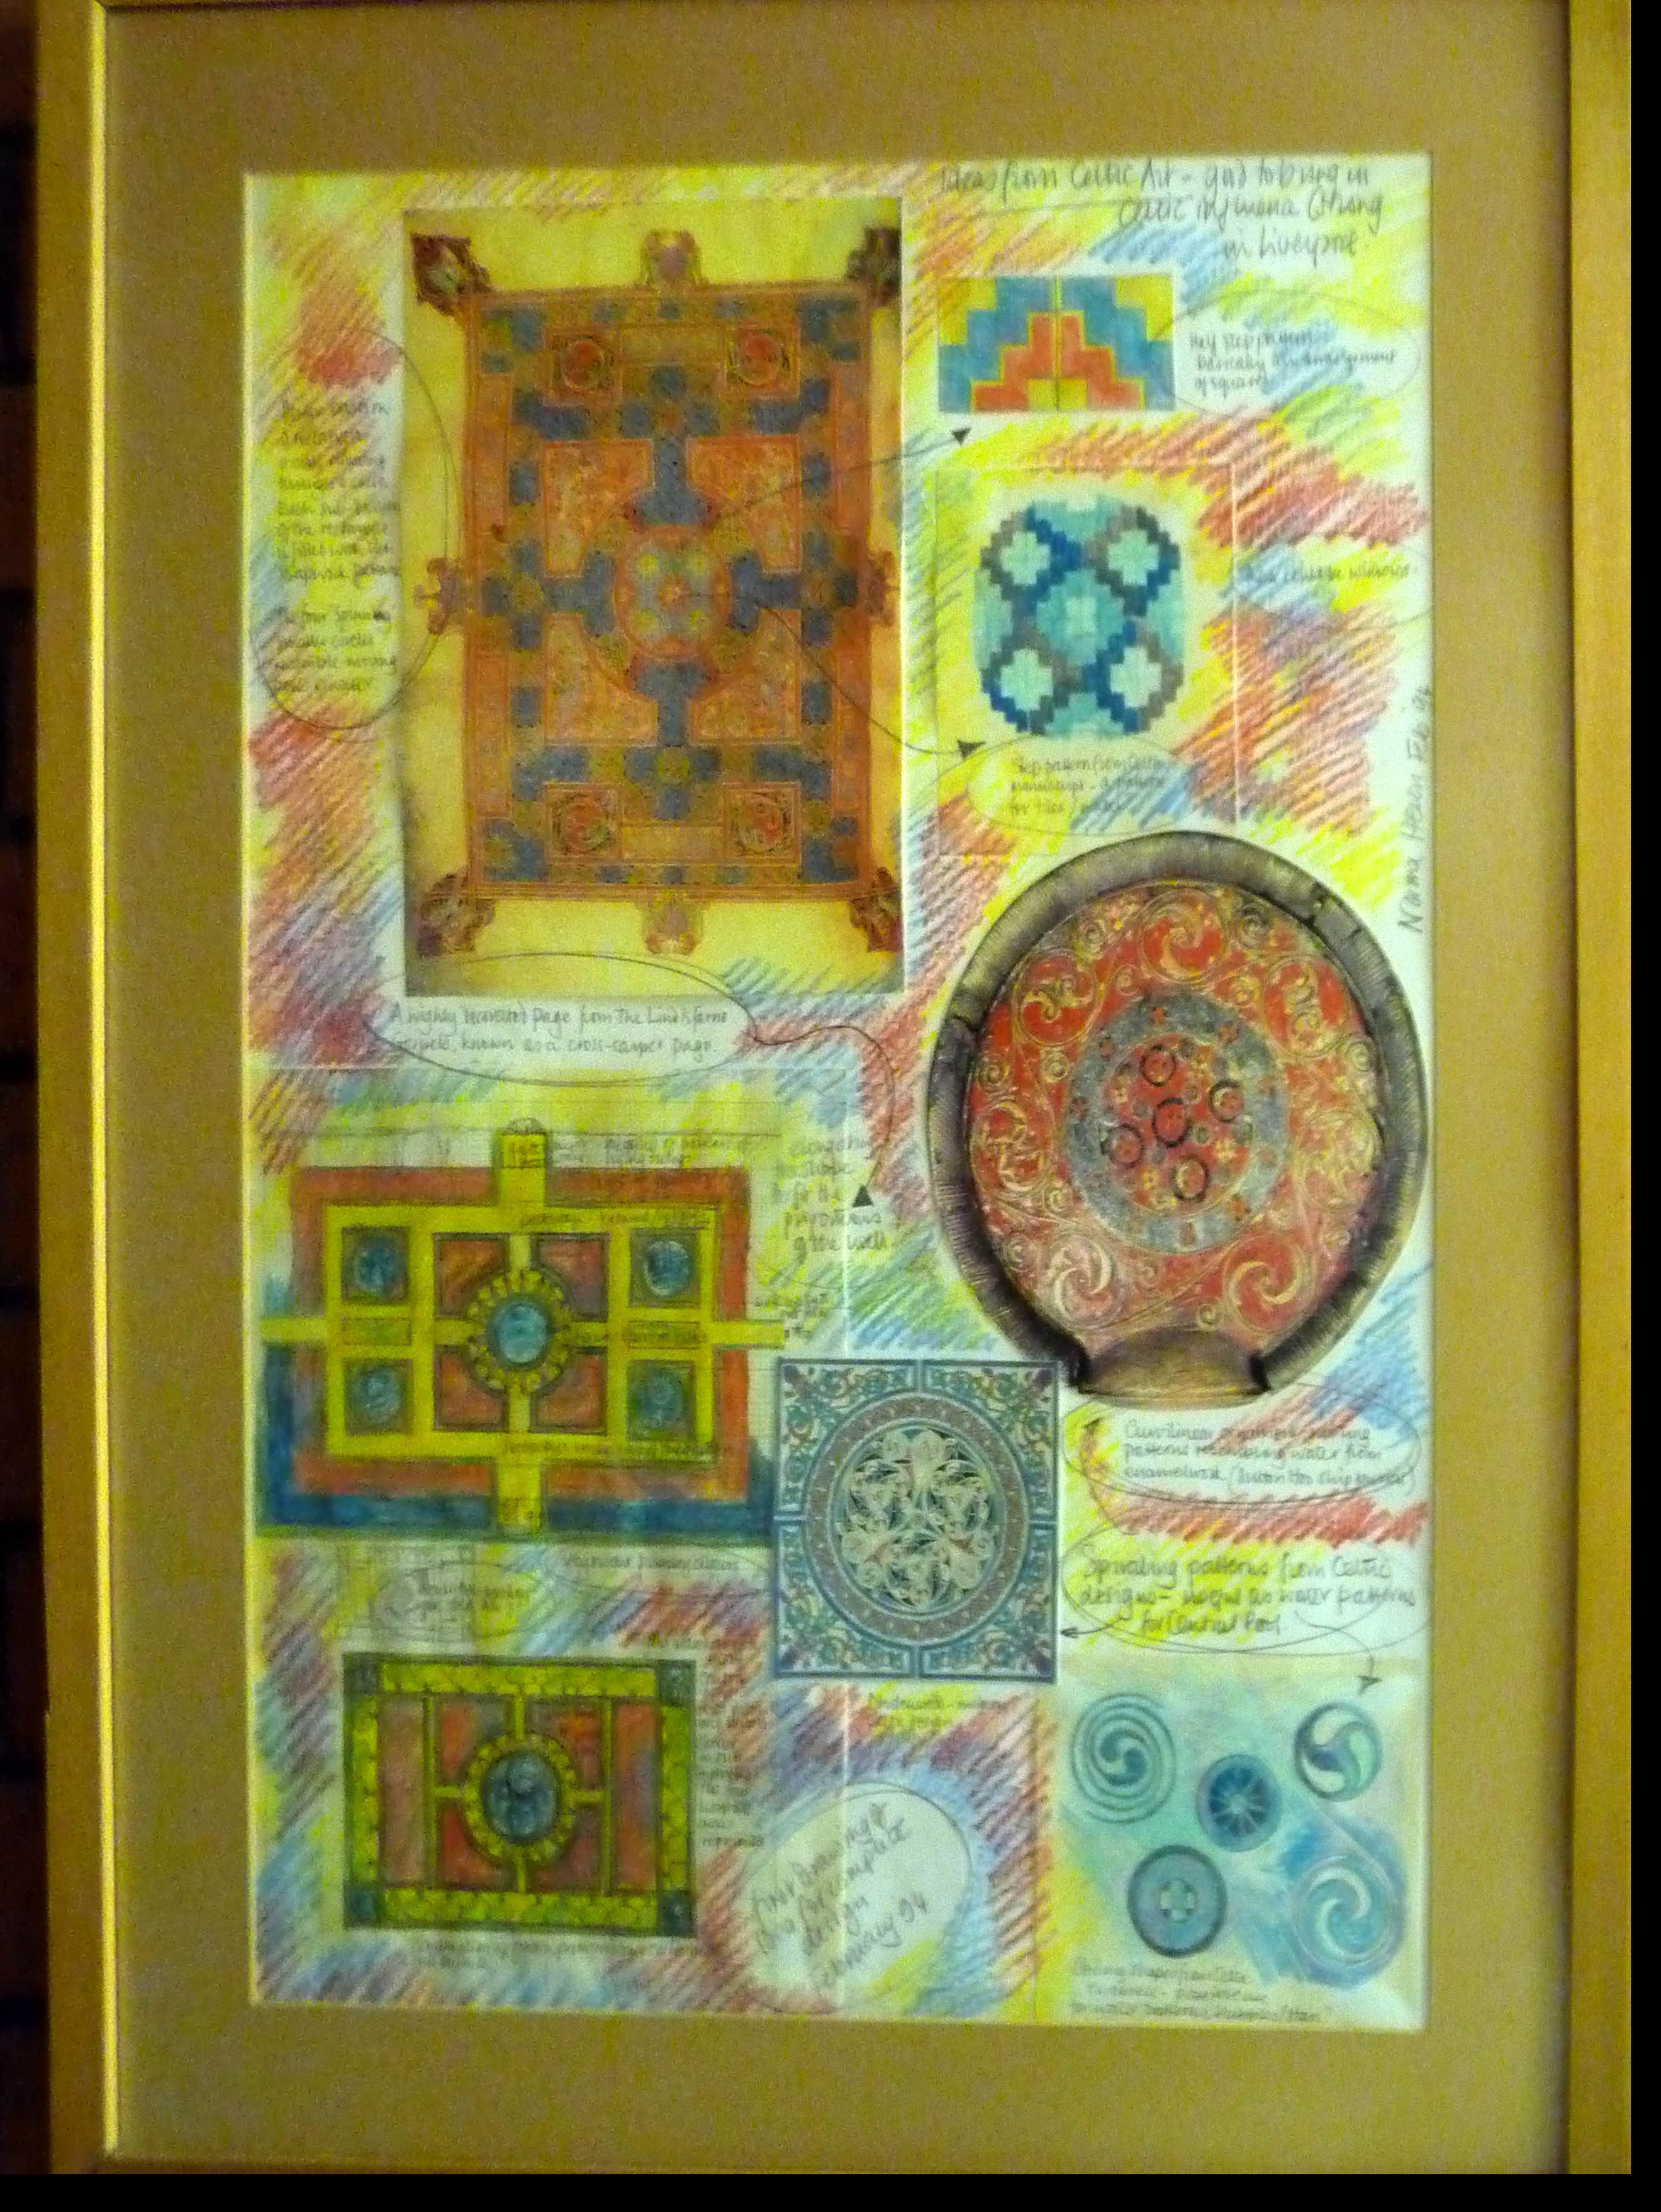 preliminary study for of "The Pool of Life Wall Hanging" by Norma Heron, 1995